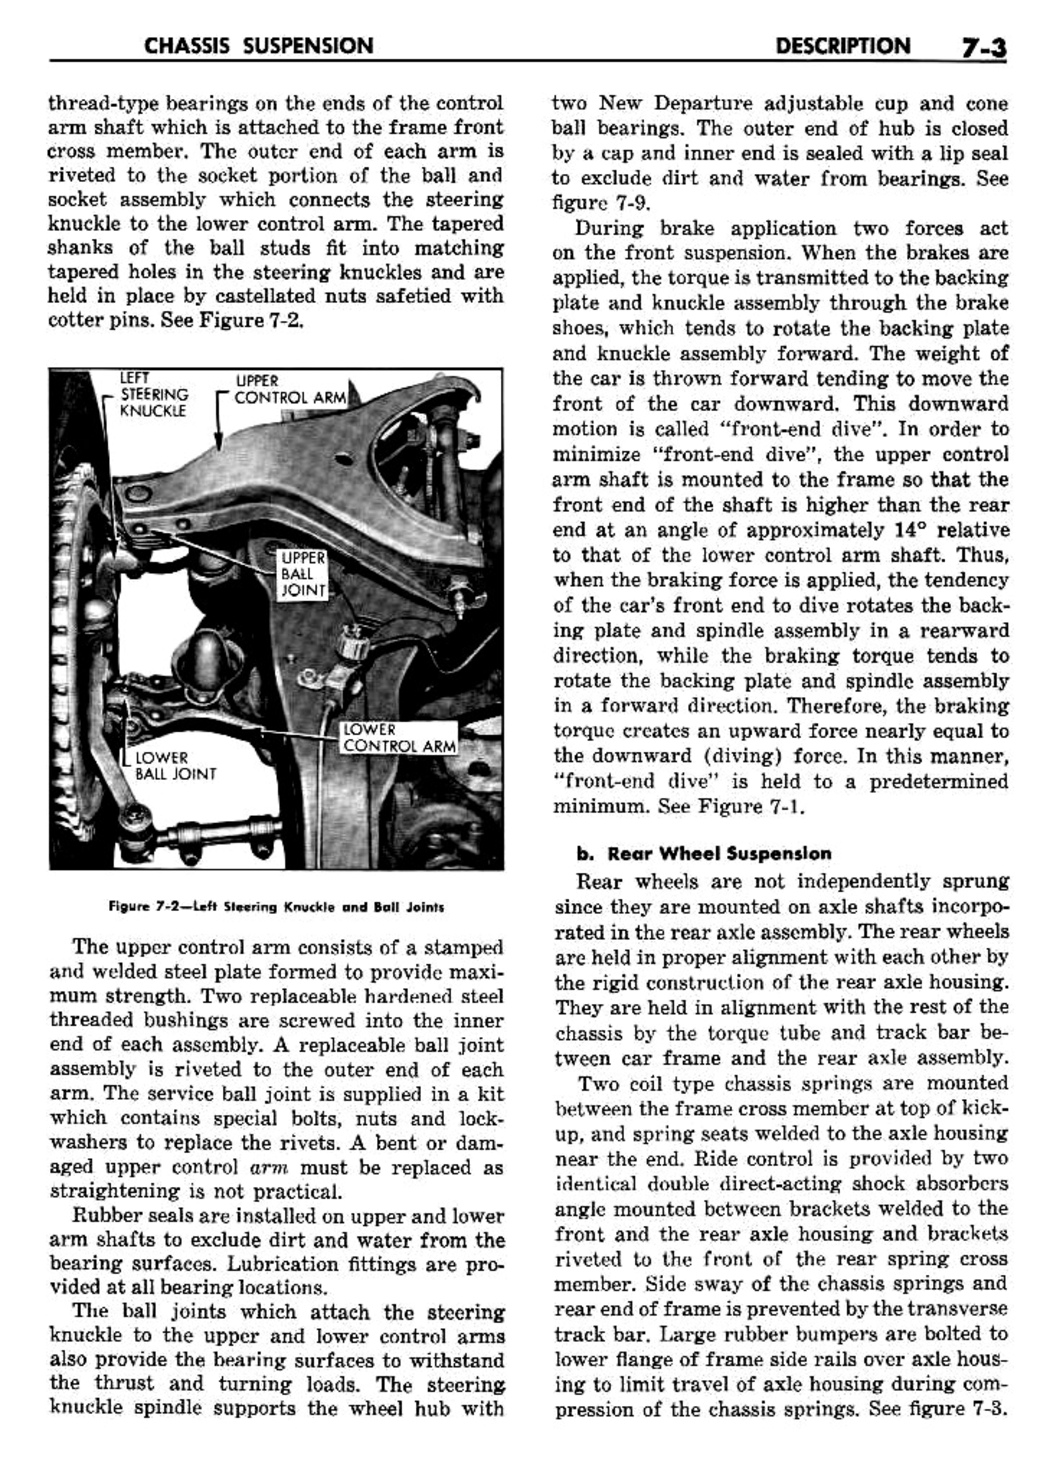 n_08 1960 Buick Shop Manual - Chassis Suspension-003-003.jpg